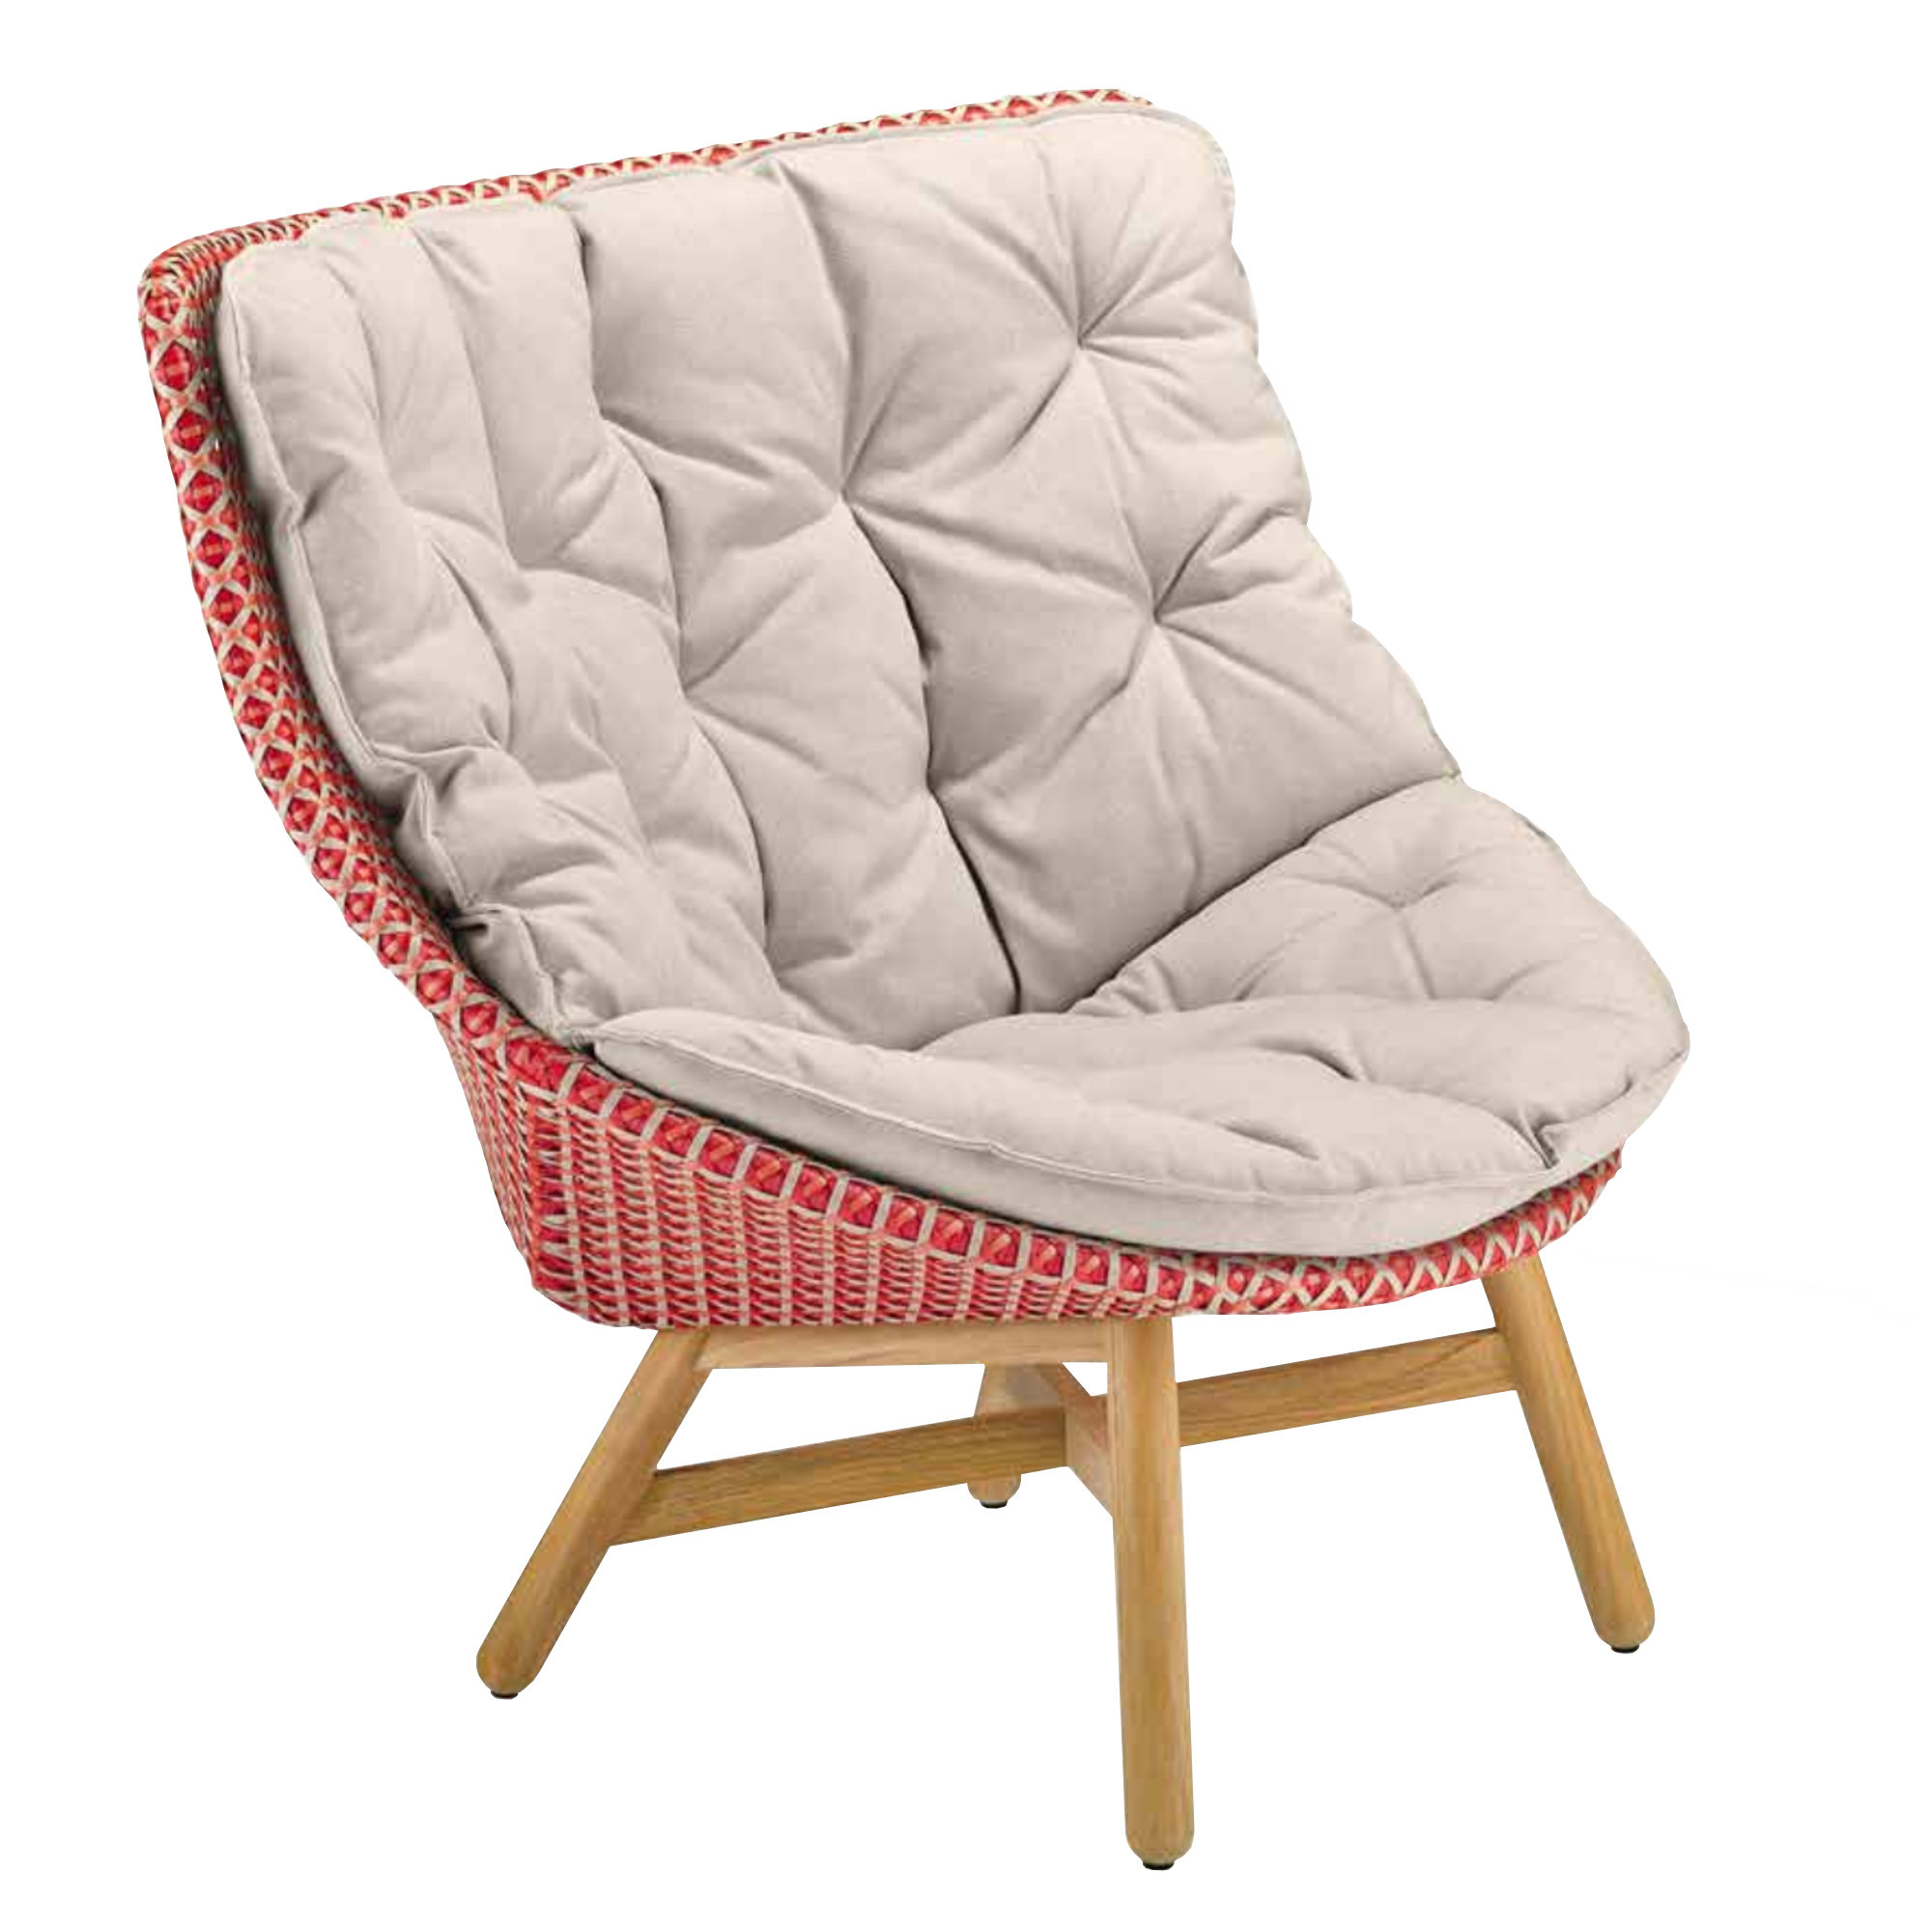 MBRACE WING CHAIR, by DEDON